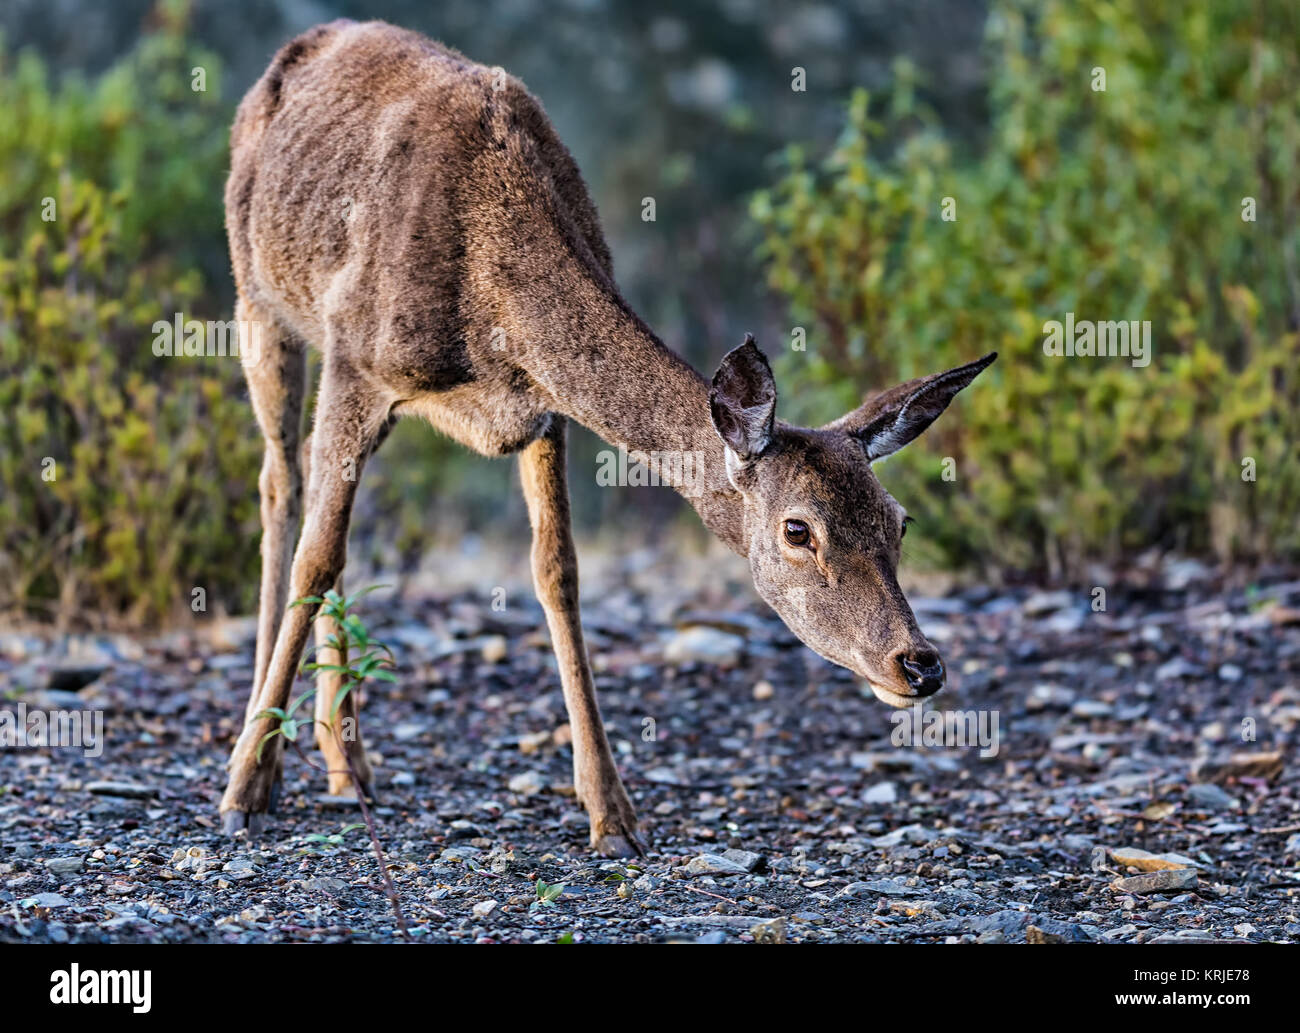 Fawn photographed at the National Park Monfragüe. Spain. Stock Photo